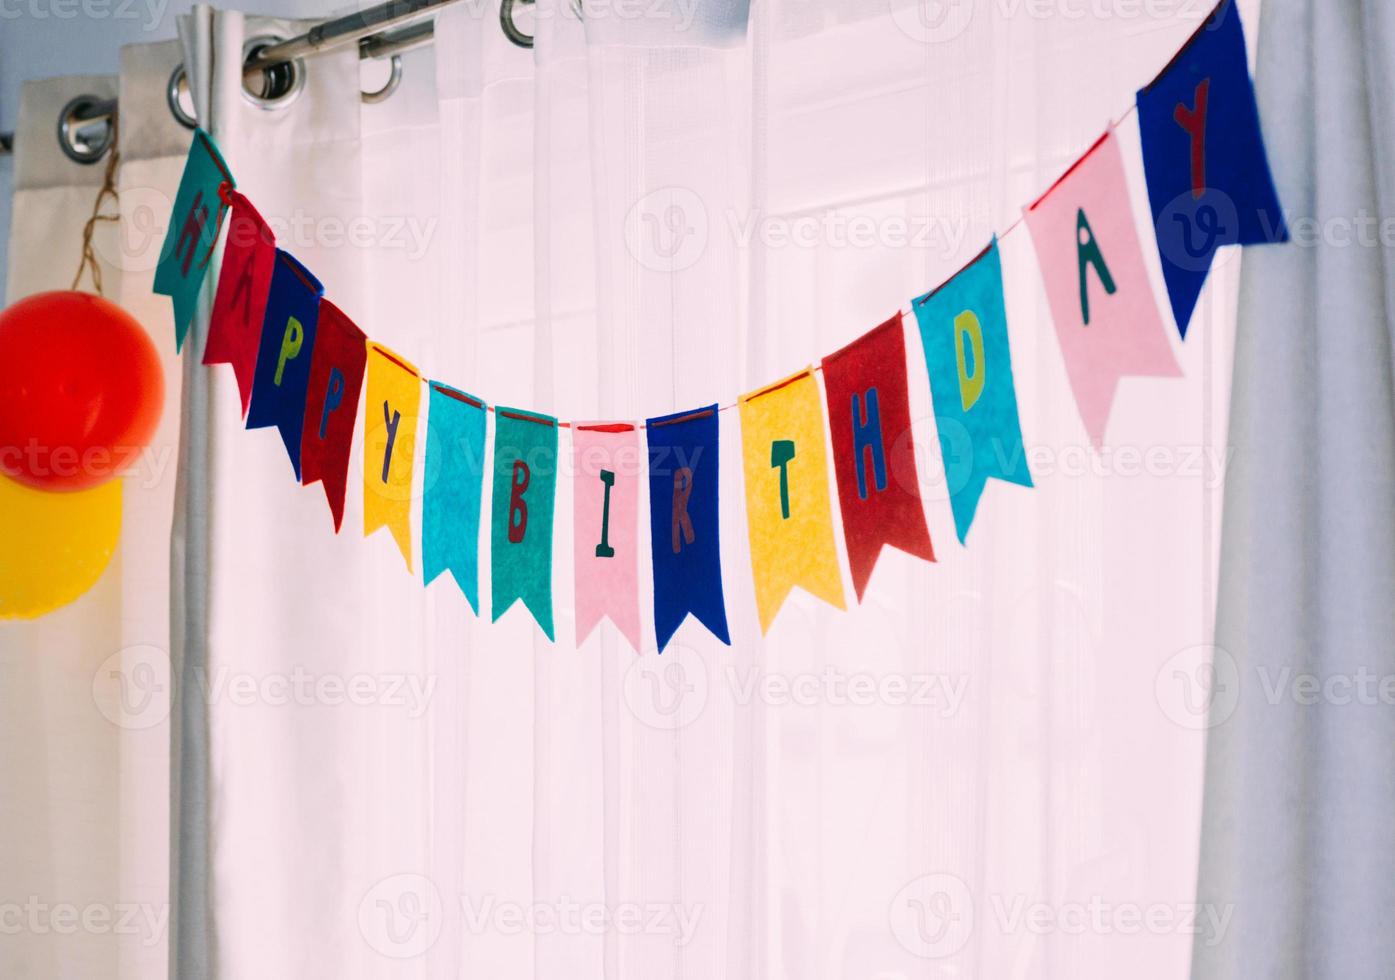 Happy birthday banner party background against white curtains and natural light photo